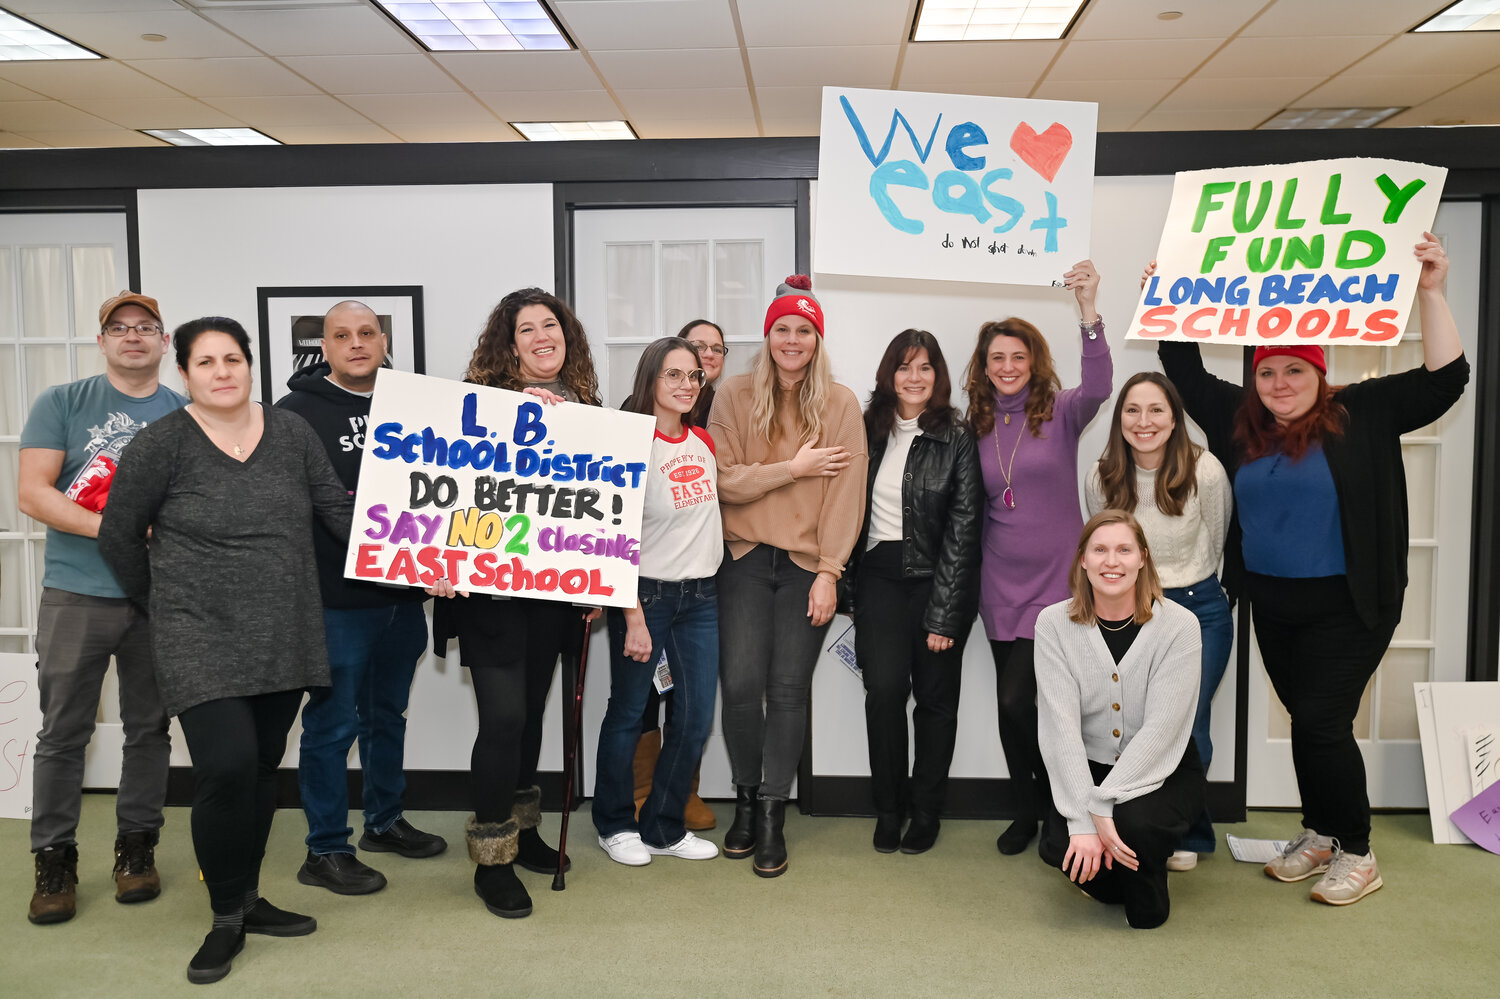 Local parents gathered at Bridgeworks on Tuesday to express their disappointment in Gov. Kathy Hochul’s proposed cuts in school aid, which could force the closure of East Elementary School.